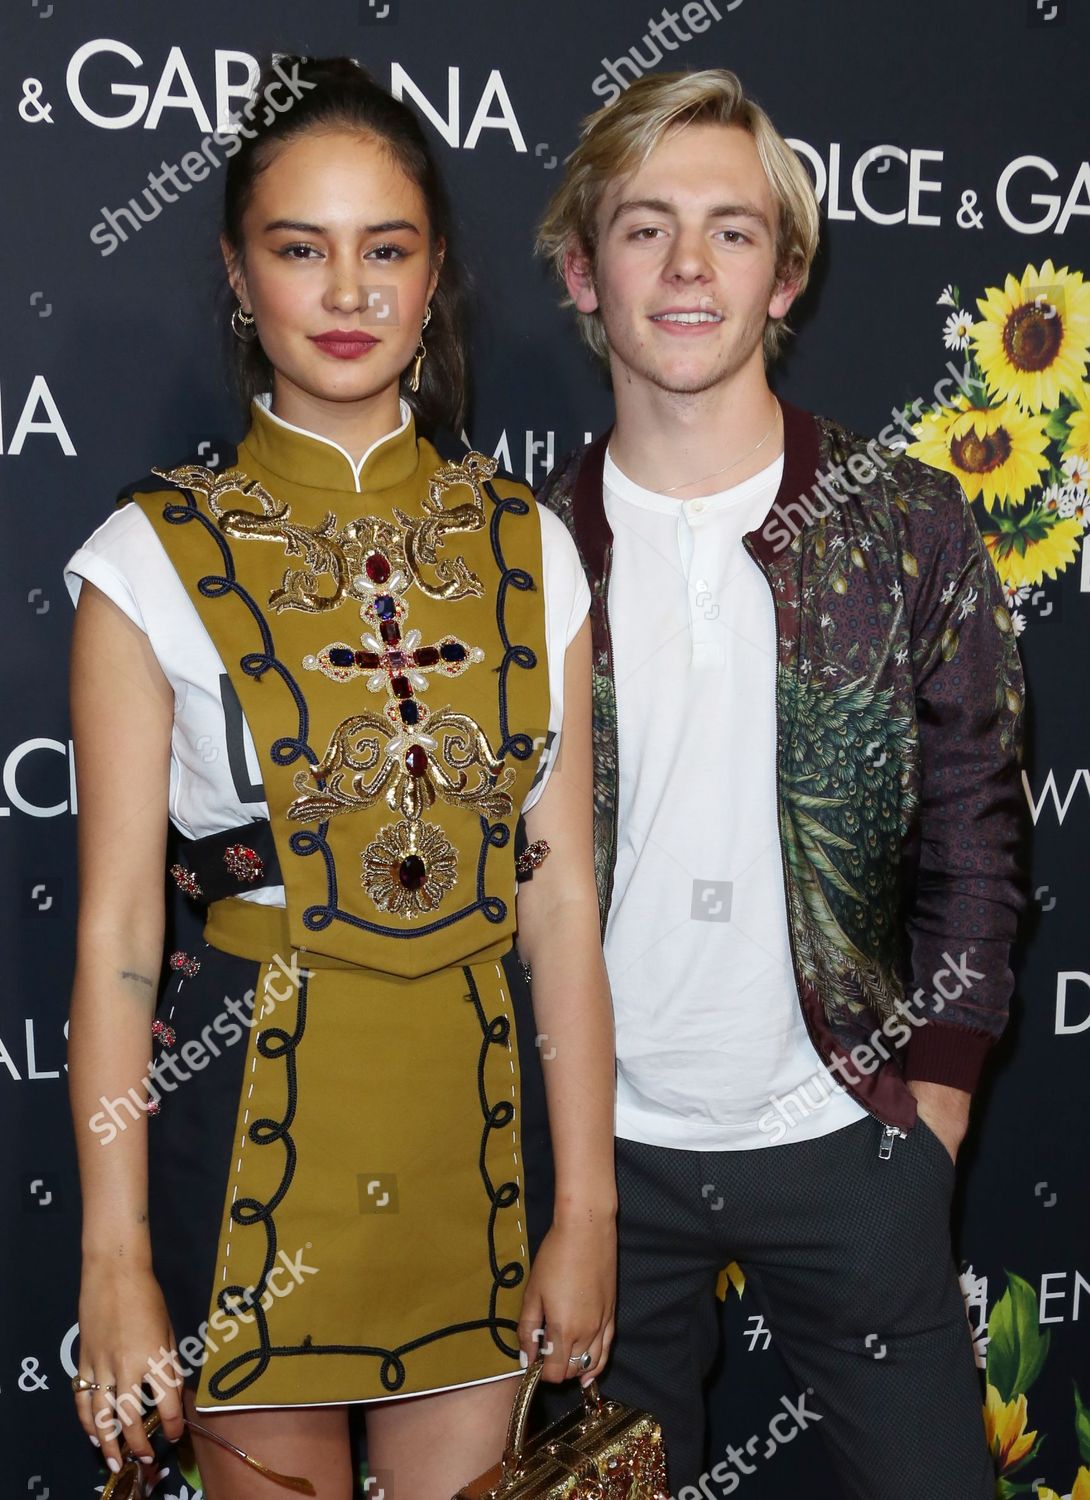 Together and courtney back lynch ross eaton Courtney Eaton